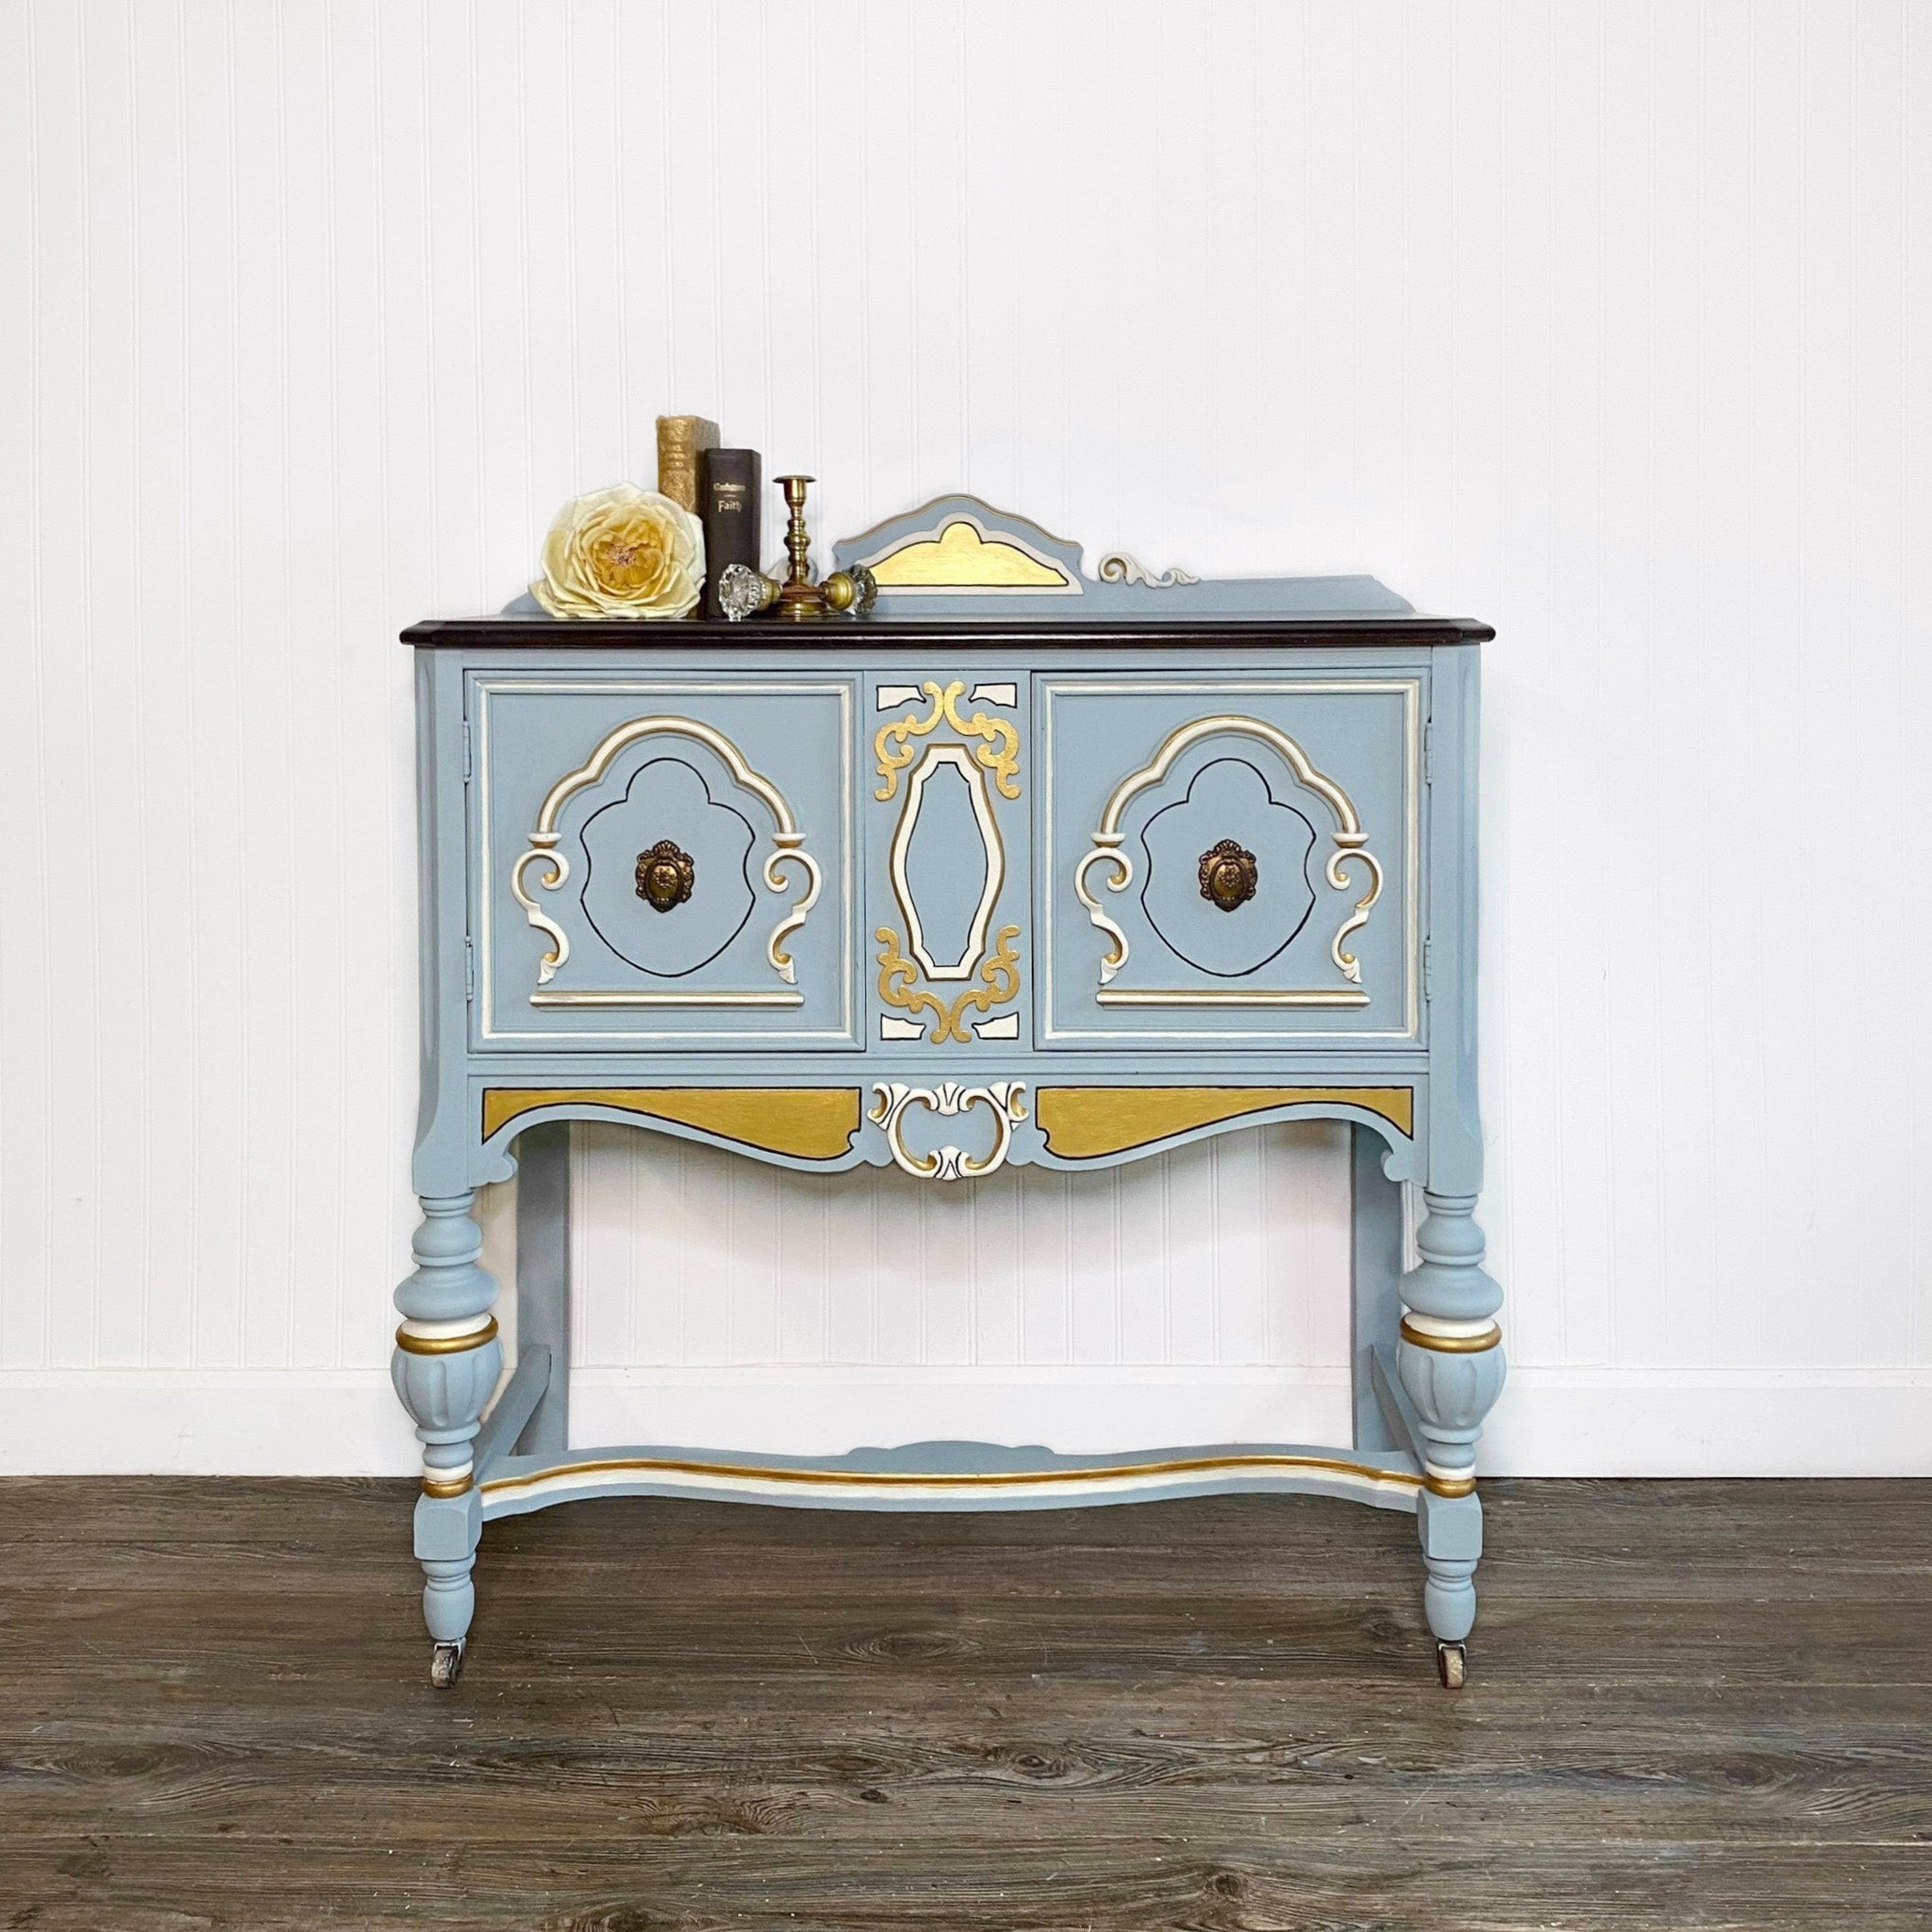 A vintage entry-way table is painted in Dixie Belle's Savannah Mist chalk mineral paint and has gold and white accents.